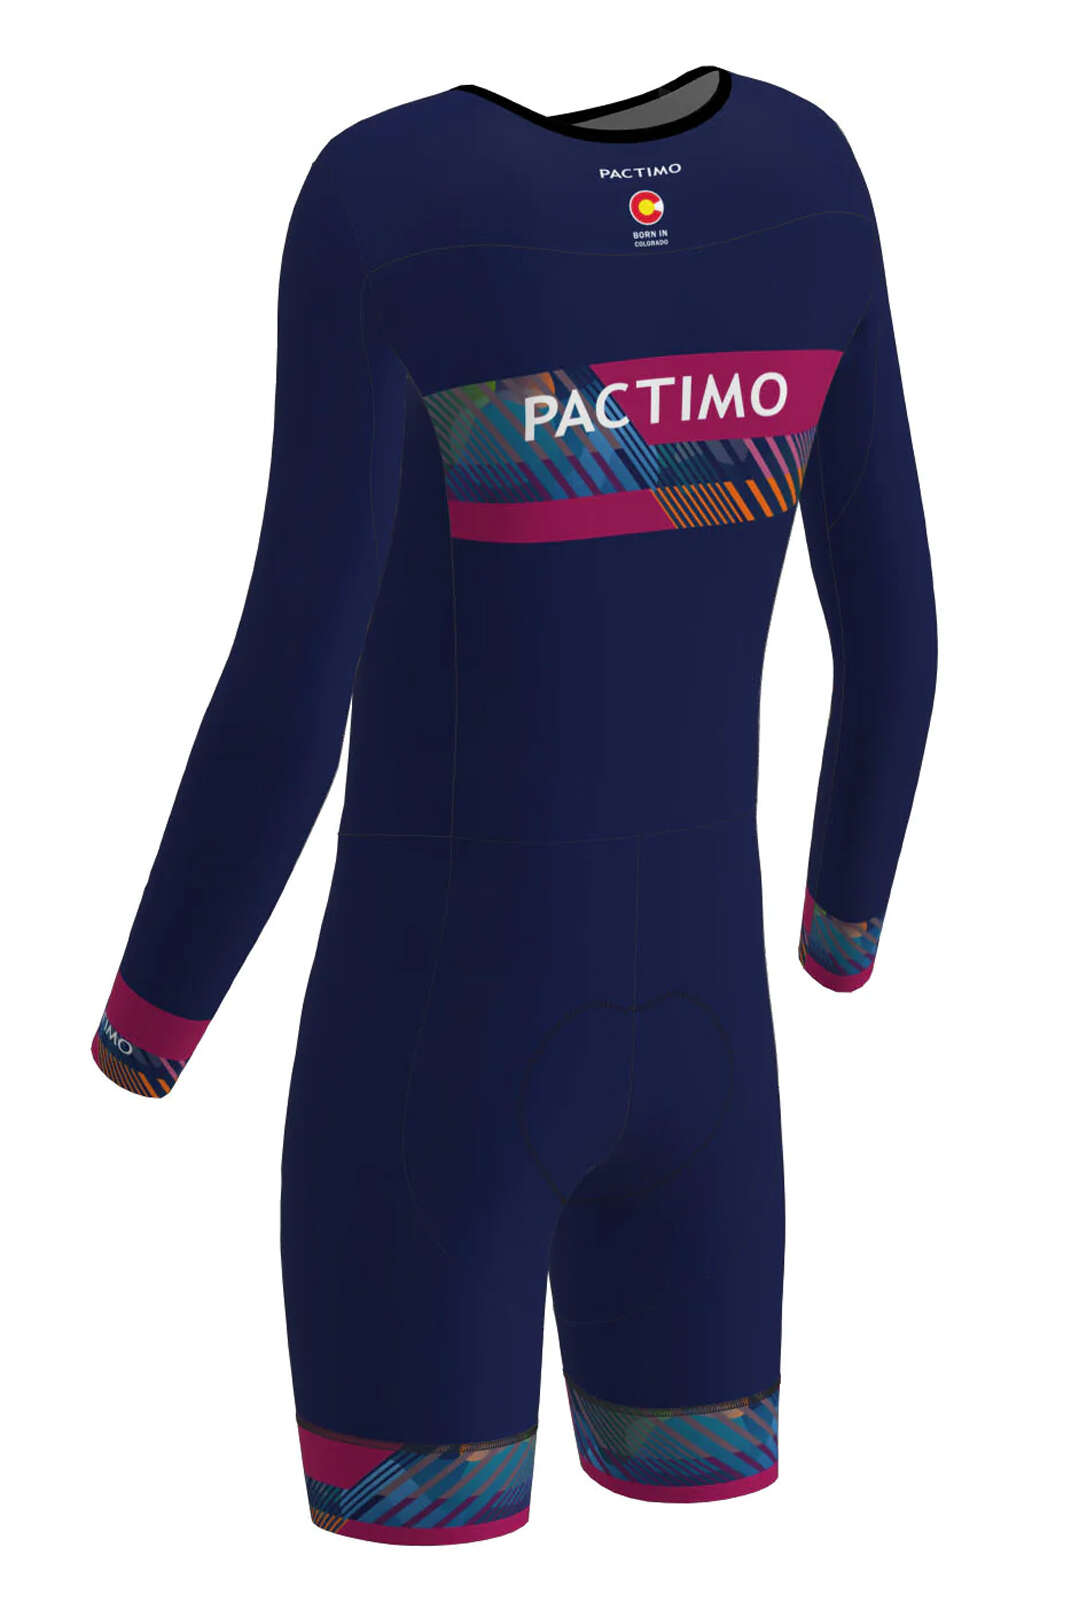 Men's Fully Printable Custom Cycling Skinsuit - Long Sleeve Back View #color-options_fully-printed